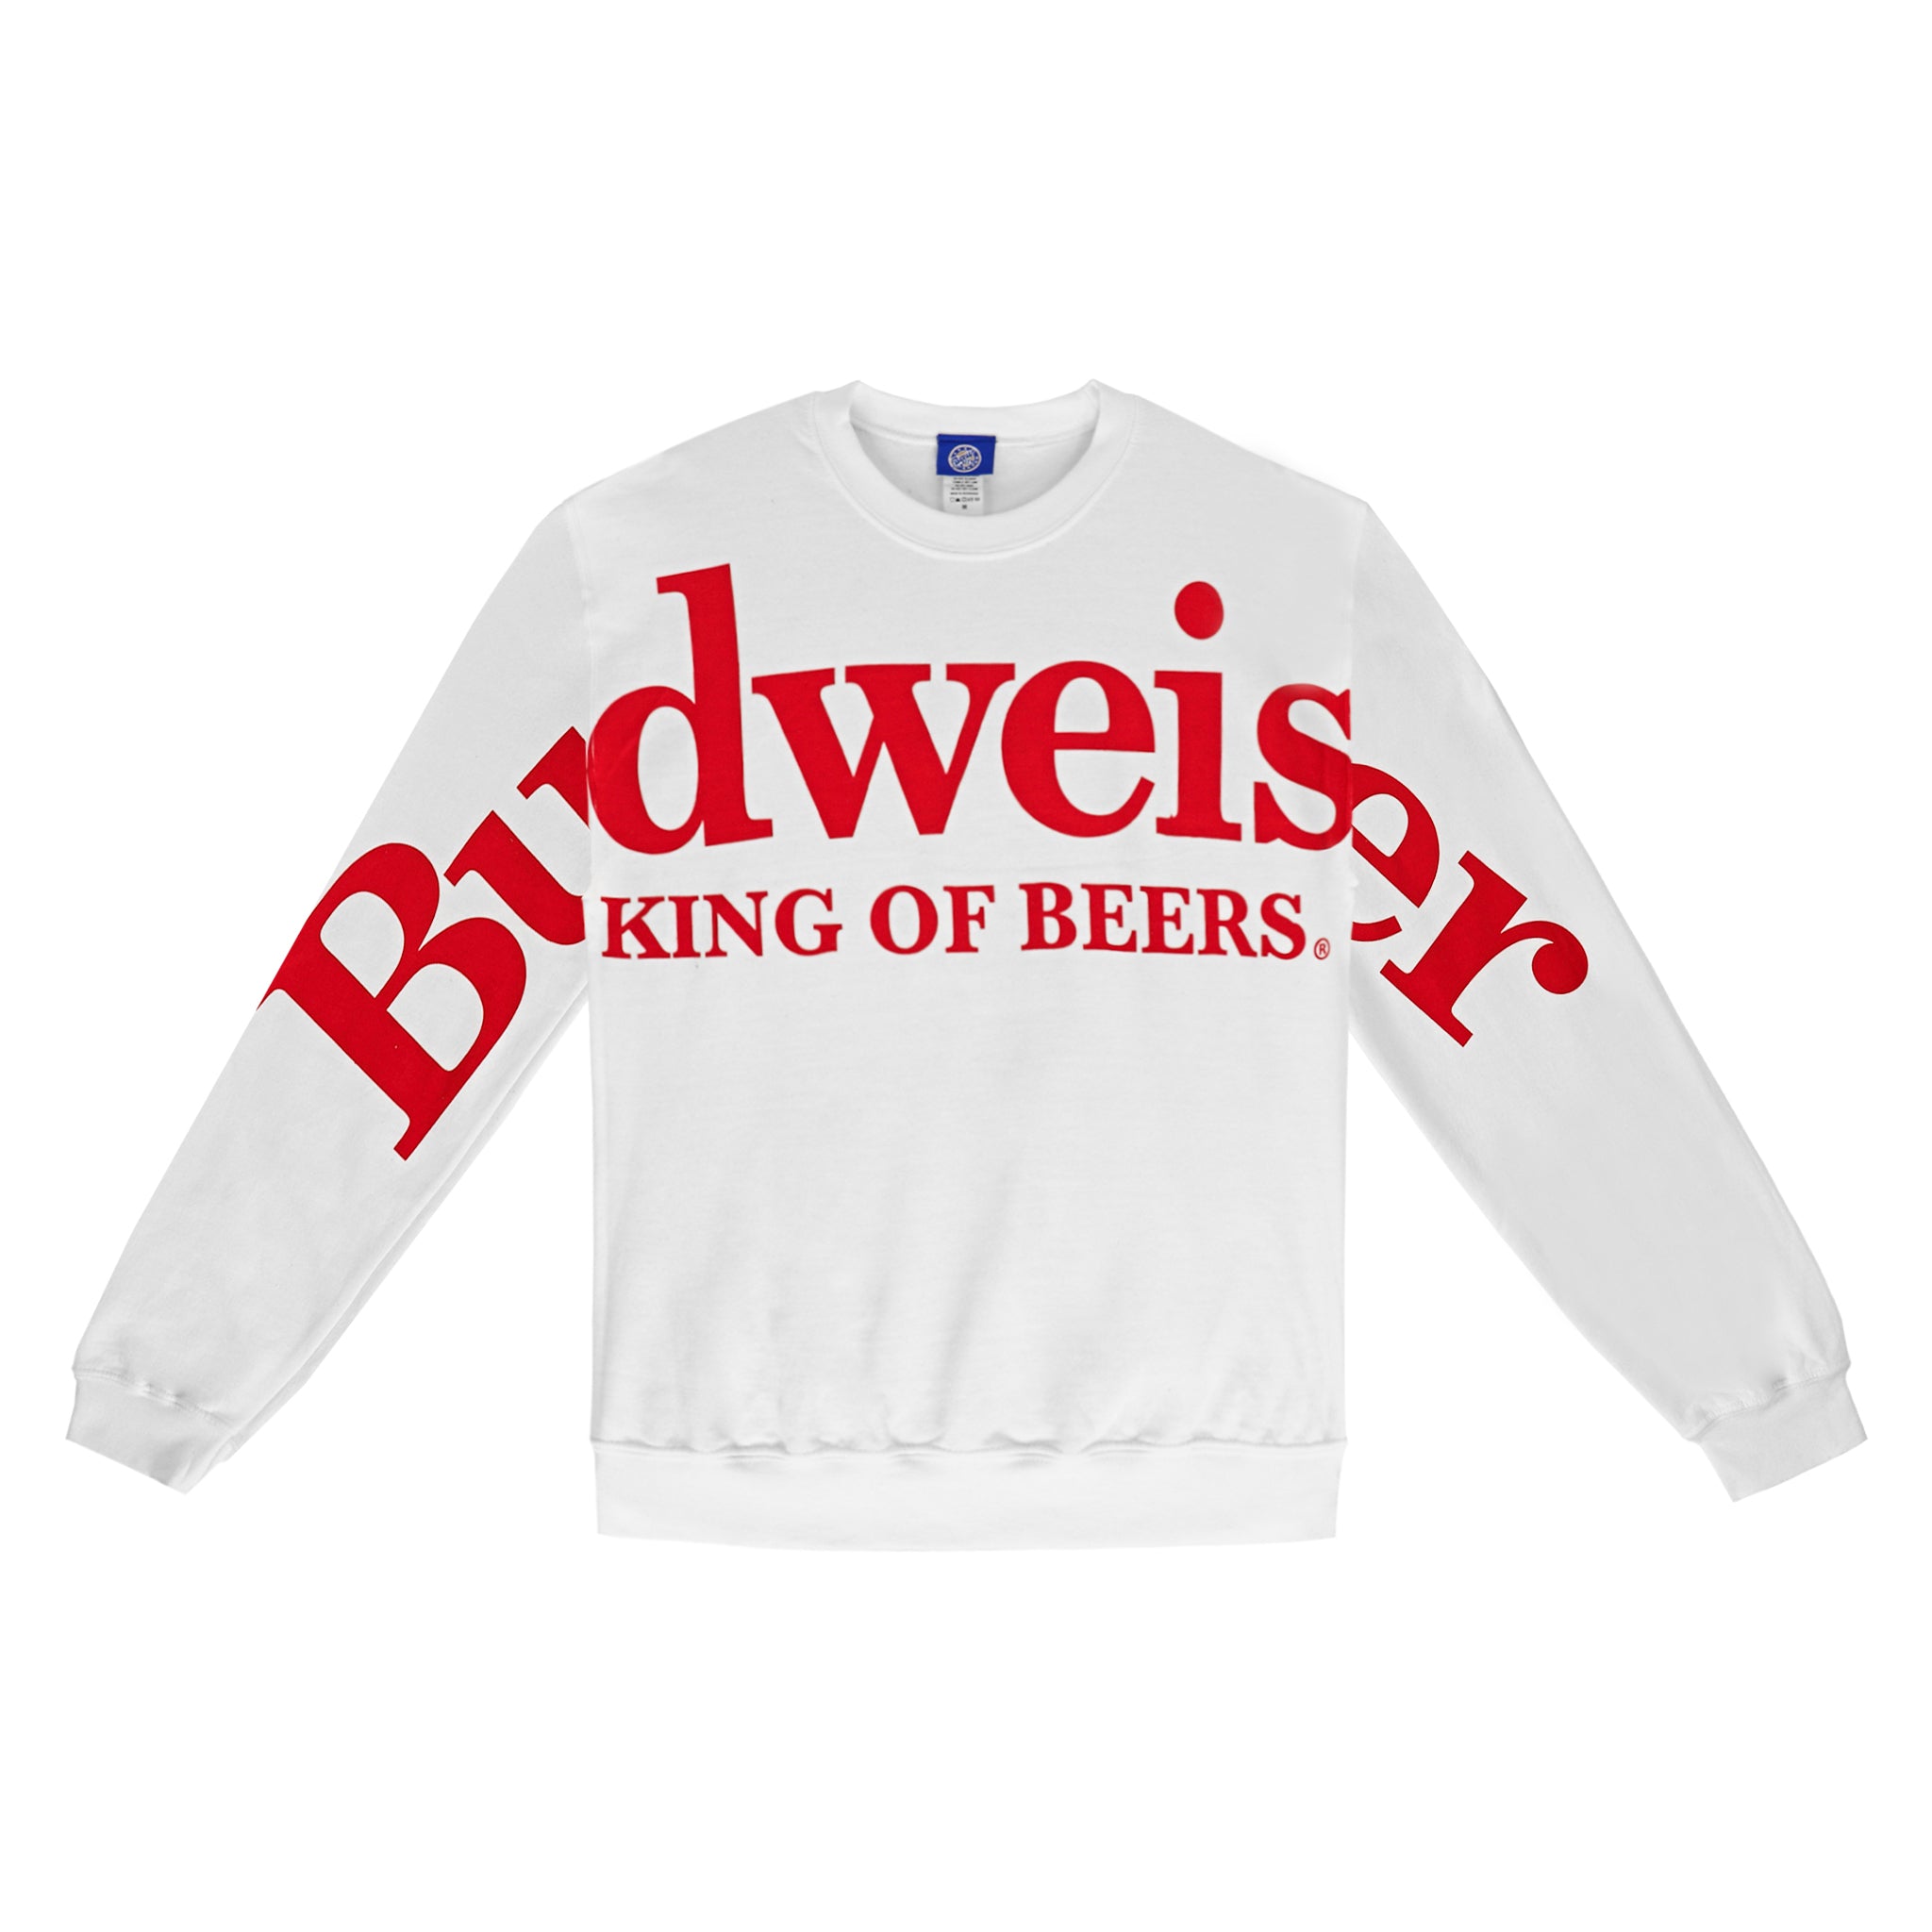 Front view of sweatshirt, "Budweiser King of Beers" spelled out across chest and along sleeves